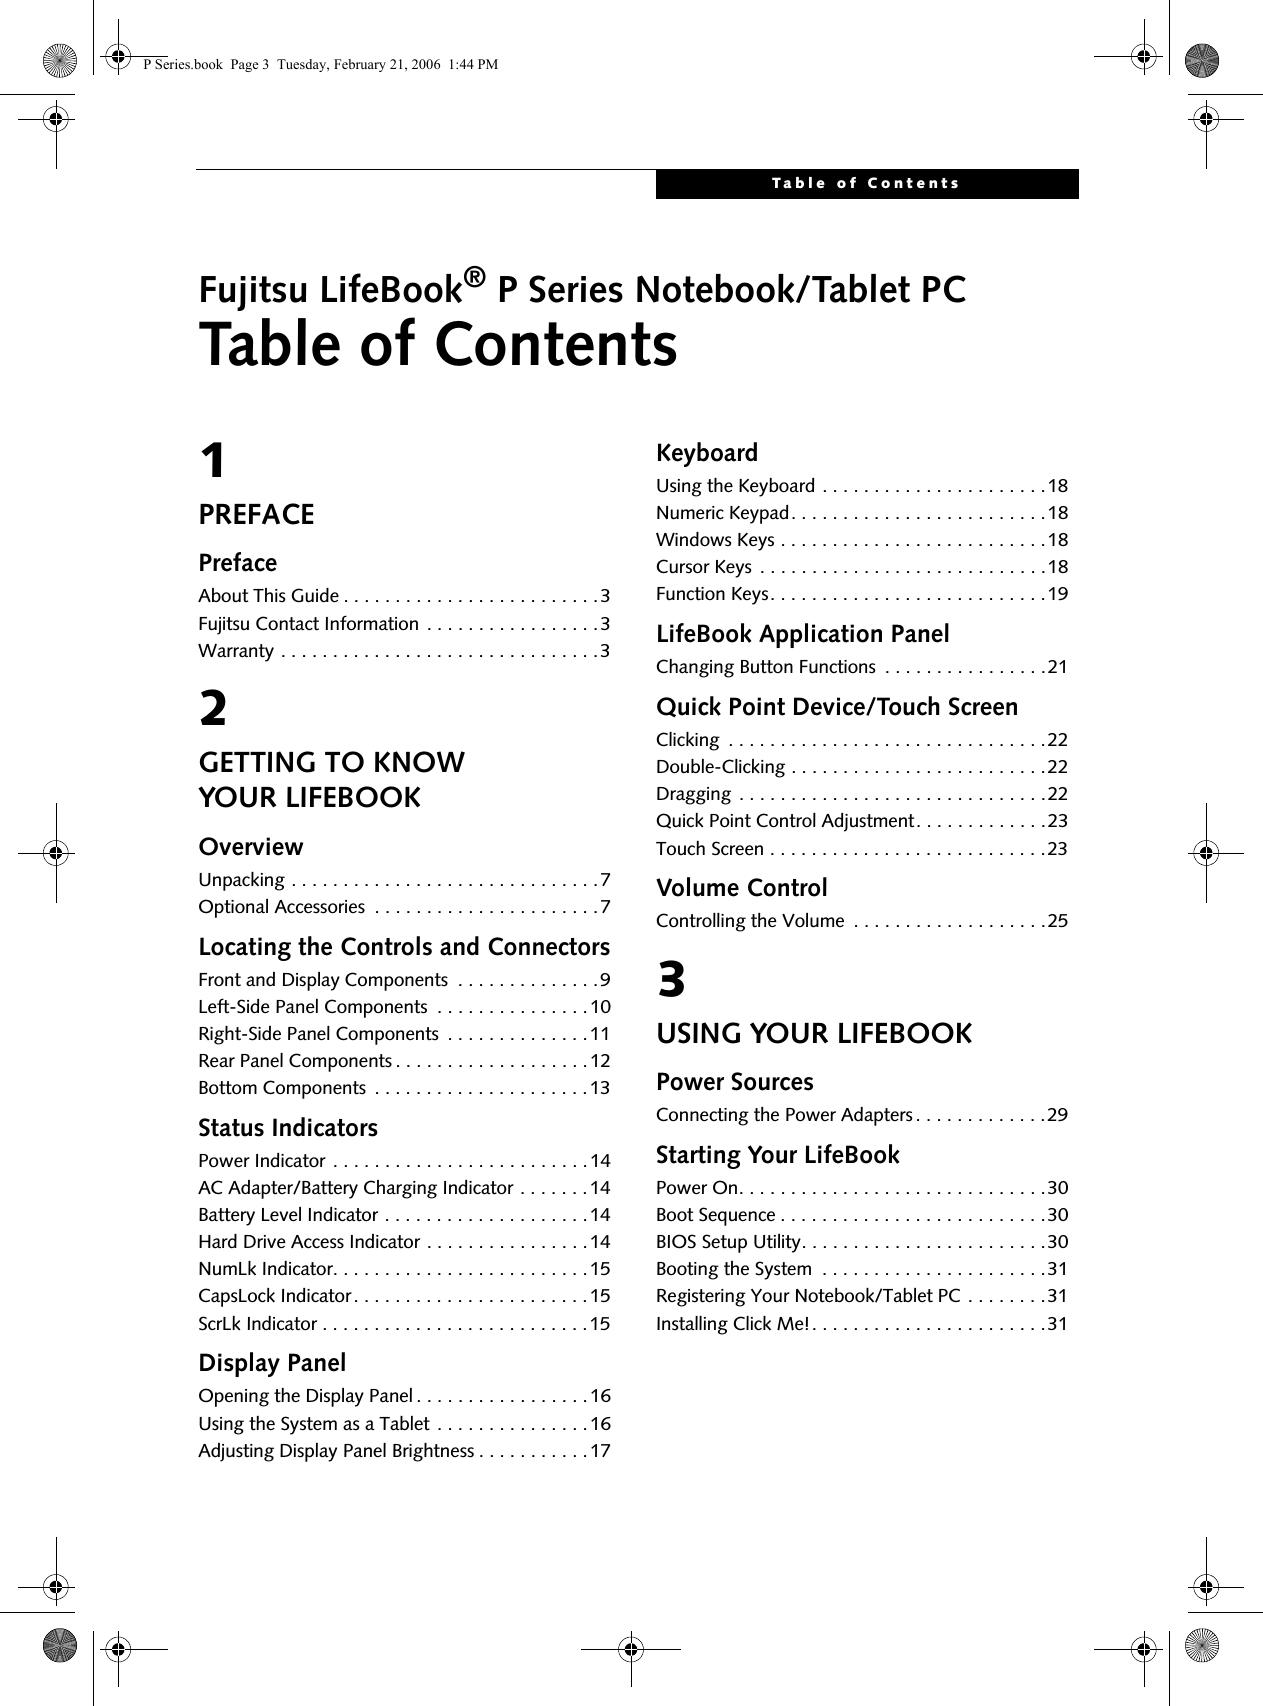 Table of ContentsFujitsu LifeBook® P Series Notebook/Tablet PCTable of Contents1PREFACEPrefaceAbout This Guide . . . . . . . . . . . . . . . . . . . . . . . . .3Fujitsu Contact Information . . . . . . . . . . . . . . . . .3Warranty . . . . . . . . . . . . . . . . . . . . . . . . . . . . . . .32GETTING TO KNOWYOUR LIFEBOOKOverviewUnpacking . . . . . . . . . . . . . . . . . . . . . . . . . . . . . .7Optional Accessories  . . . . . . . . . . . . . . . . . . . . . .7Locating the Controls and ConnectorsFront and Display Components  . . . . . . . . . . . . . .9Left-Side Panel Components  . . . . . . . . . . . . . . .10Right-Side Panel Components  . . . . . . . . . . . . . .11Rear Panel Components . . . . . . . . . . . . . . . . . . .12Bottom Components  . . . . . . . . . . . . . . . . . . . . .13Status IndicatorsPower Indicator . . . . . . . . . . . . . . . . . . . . . . . . .14AC Adapter/Battery Charging Indicator . . . . . . . 14Battery Level Indicator . . . . . . . . . . . . . . . . . . . .14Hard Drive Access Indicator . . . . . . . . . . . . . . . .14NumLk Indicator. . . . . . . . . . . . . . . . . . . . . . . . .15CapsLock Indicator. . . . . . . . . . . . . . . . . . . . . . .15ScrLk Indicator . . . . . . . . . . . . . . . . . . . . . . . . . .15Display PanelOpening the Display Panel . . . . . . . . . . . . . . . . .16Using the System as a Tablet . . . . . . . . . . . . . . .16Adjusting Display Panel Brightness . . . . . . . . . . .17KeyboardUsing the Keyboard . . . . . . . . . . . . . . . . . . . . . .18Numeric Keypad. . . . . . . . . . . . . . . . . . . . . . . . .18Windows Keys . . . . . . . . . . . . . . . . . . . . . . . . . .18Cursor Keys  . . . . . . . . . . . . . . . . . . . . . . . . . . . .18Function Keys. . . . . . . . . . . . . . . . . . . . . . . . . . .19LifeBook Application PanelChanging Button Functions  . . . . . . . . . . . . . . . .21Quick Point Device/Touch ScreenClicking  . . . . . . . . . . . . . . . . . . . . . . . . . . . . . . .22Double-Clicking . . . . . . . . . . . . . . . . . . . . . . . . .22Dragging  . . . . . . . . . . . . . . . . . . . . . . . . . . . . . .22Quick Point Control Adjustment. . . . . . . . . . . . .23Touch Screen . . . . . . . . . . . . . . . . . . . . . . . . . . .23Volume ControlControlling the Volume  . . . . . . . . . . . . . . . . . . .253USING YOUR LIFEBOOKPower SourcesConnecting the Power Adapters . . . . . . . . . . . . .29Starting Your LifeBookPower On. . . . . . . . . . . . . . . . . . . . . . . . . . . . . .30Boot Sequence . . . . . . . . . . . . . . . . . . . . . . . . . .30BIOS Setup Utility. . . . . . . . . . . . . . . . . . . . . . . .30Booting the System  . . . . . . . . . . . . . . . . . . . . . .31Registering Your Notebook/Tablet PC . . . . . . . .31Installing Click Me!. . . . . . . . . . . . . . . . . . . . . . .31P Series.book  Page 3  Tuesday, February 21, 2006  1:44 PM